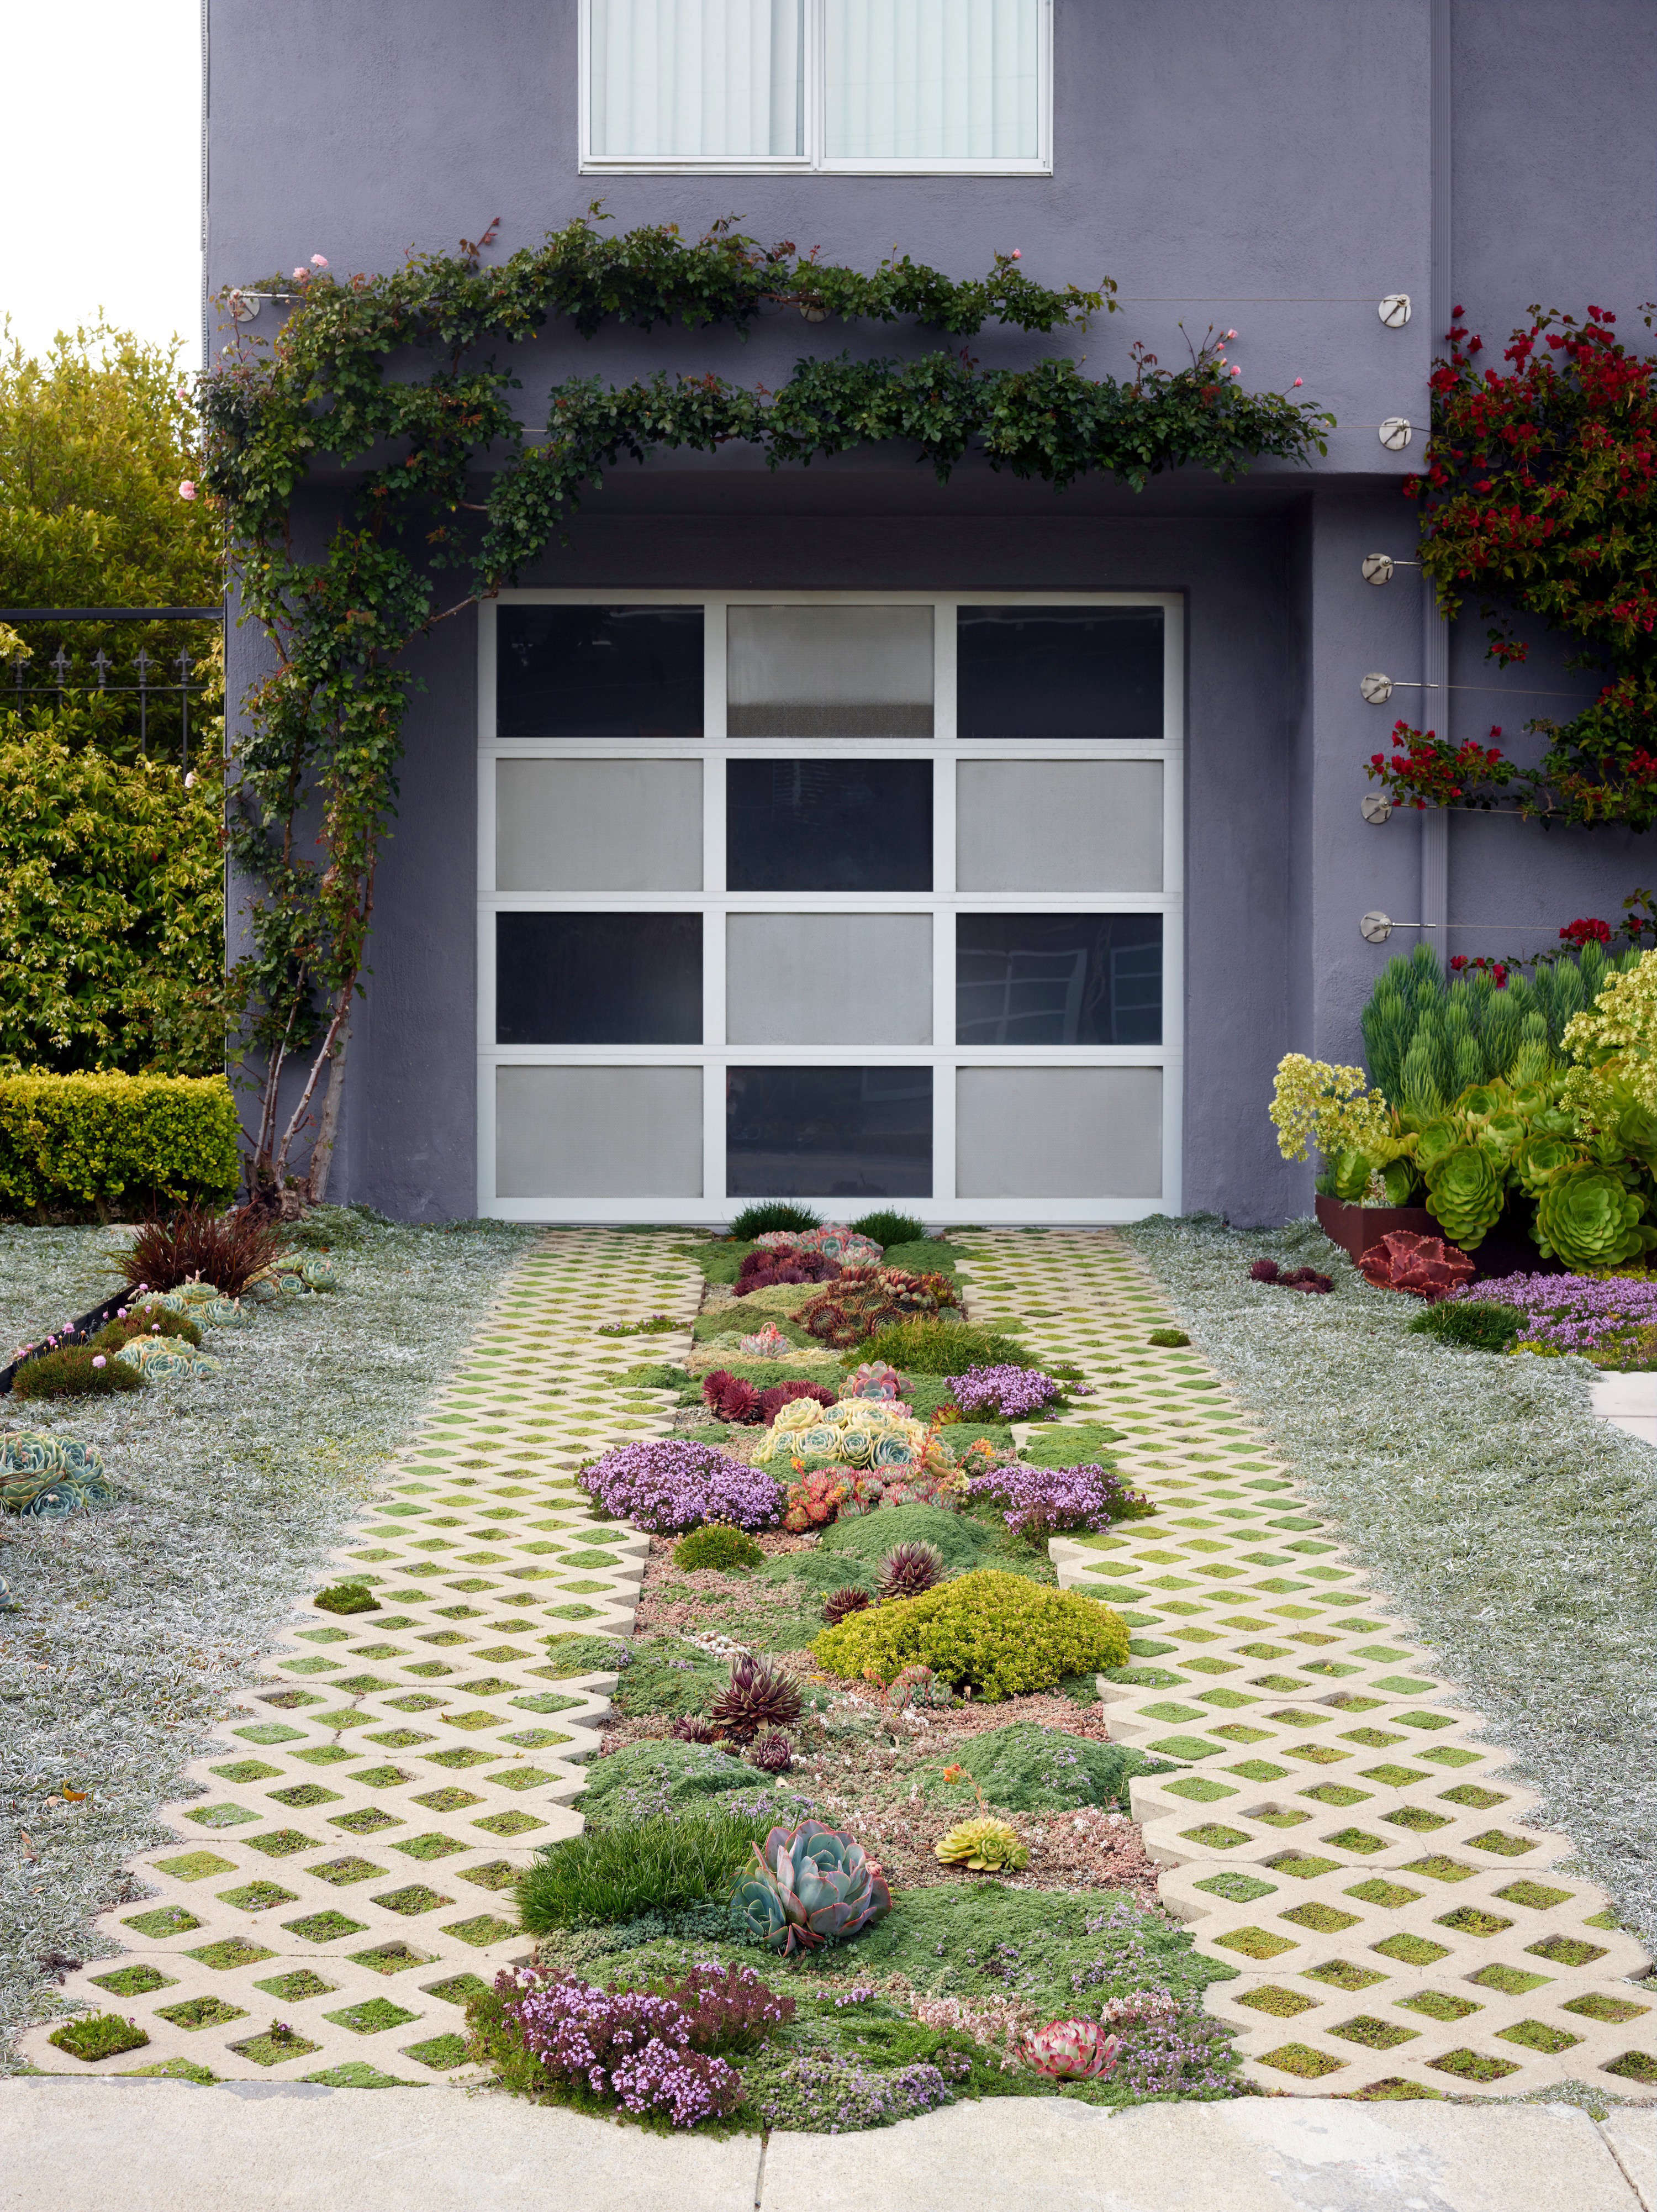 20 Things Nobody Tells You About Garage Design   Gardenista